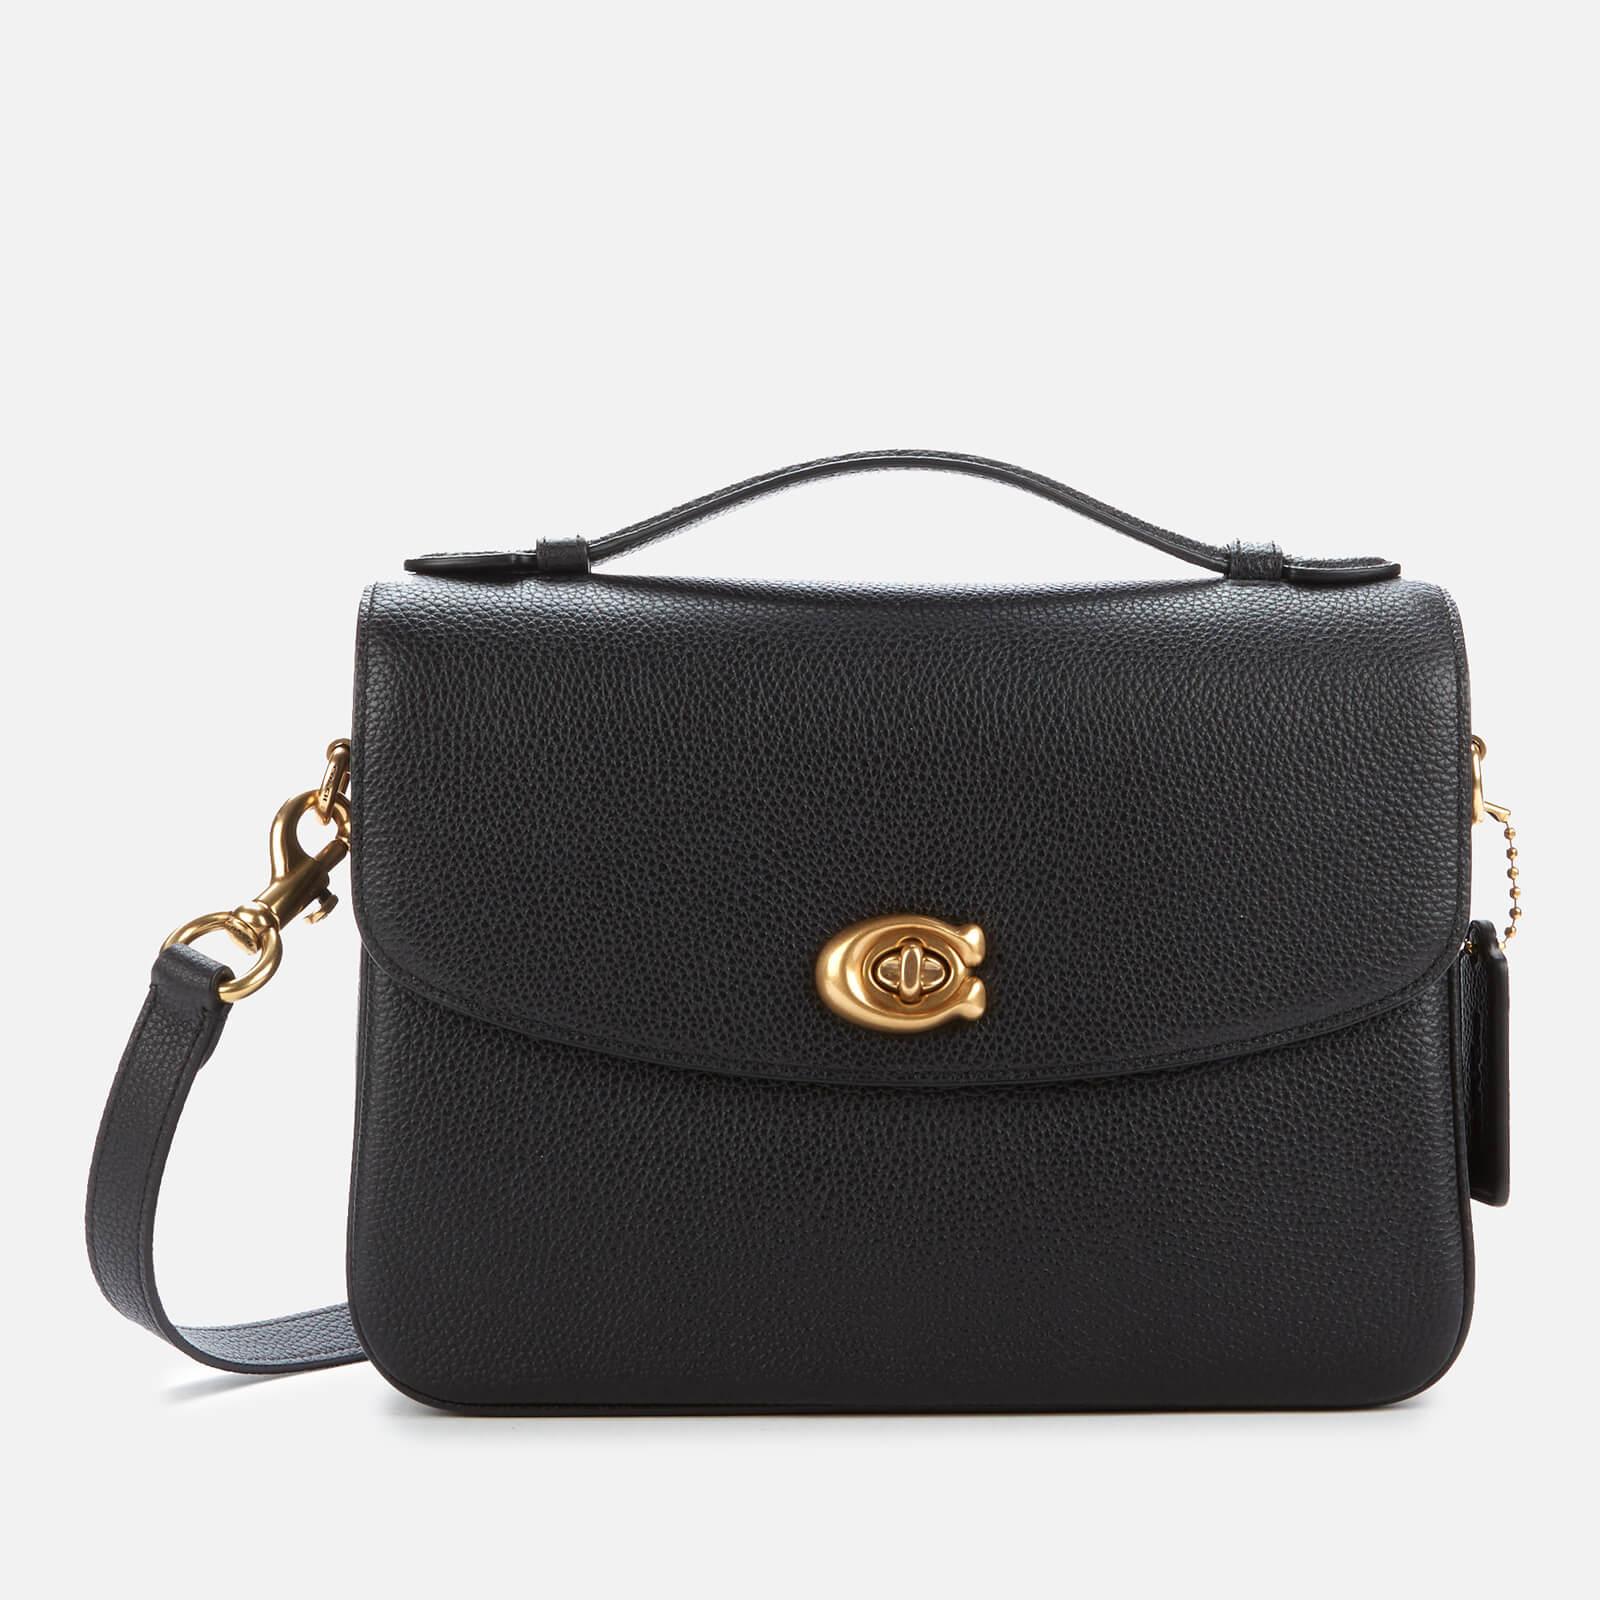 COACH Polished Pebbled Leather Cassie Cross Body Bag in Black | Lyst